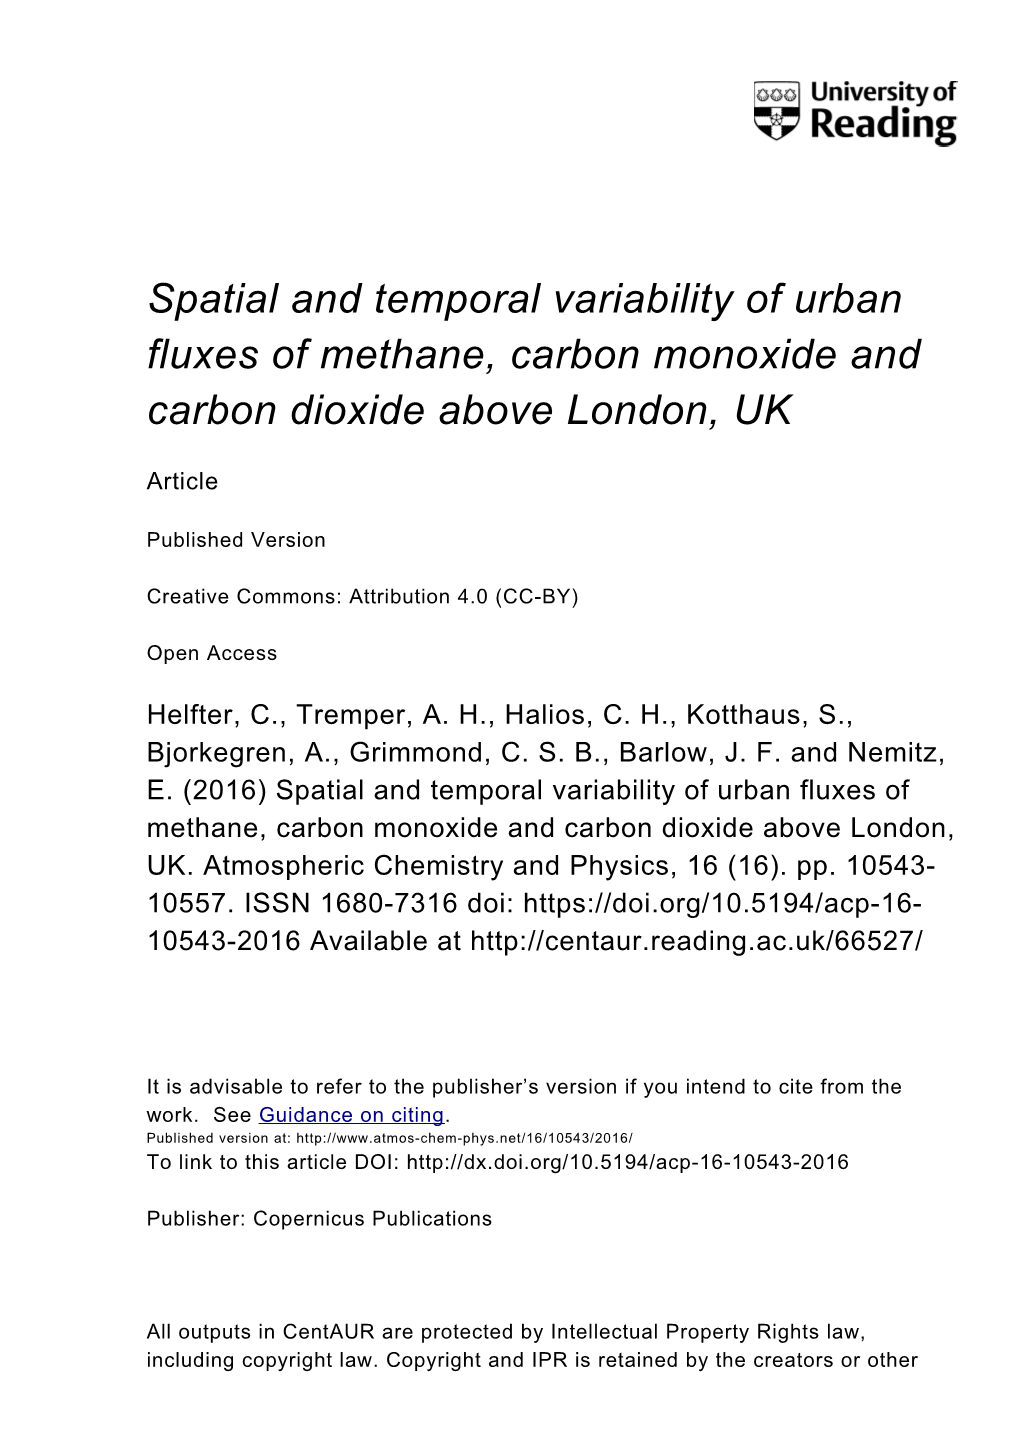 Spatial and Temporal Variability of Urban Fluxes of Methane, Carbon Monoxide and Carbon Dioxide Above London, UK